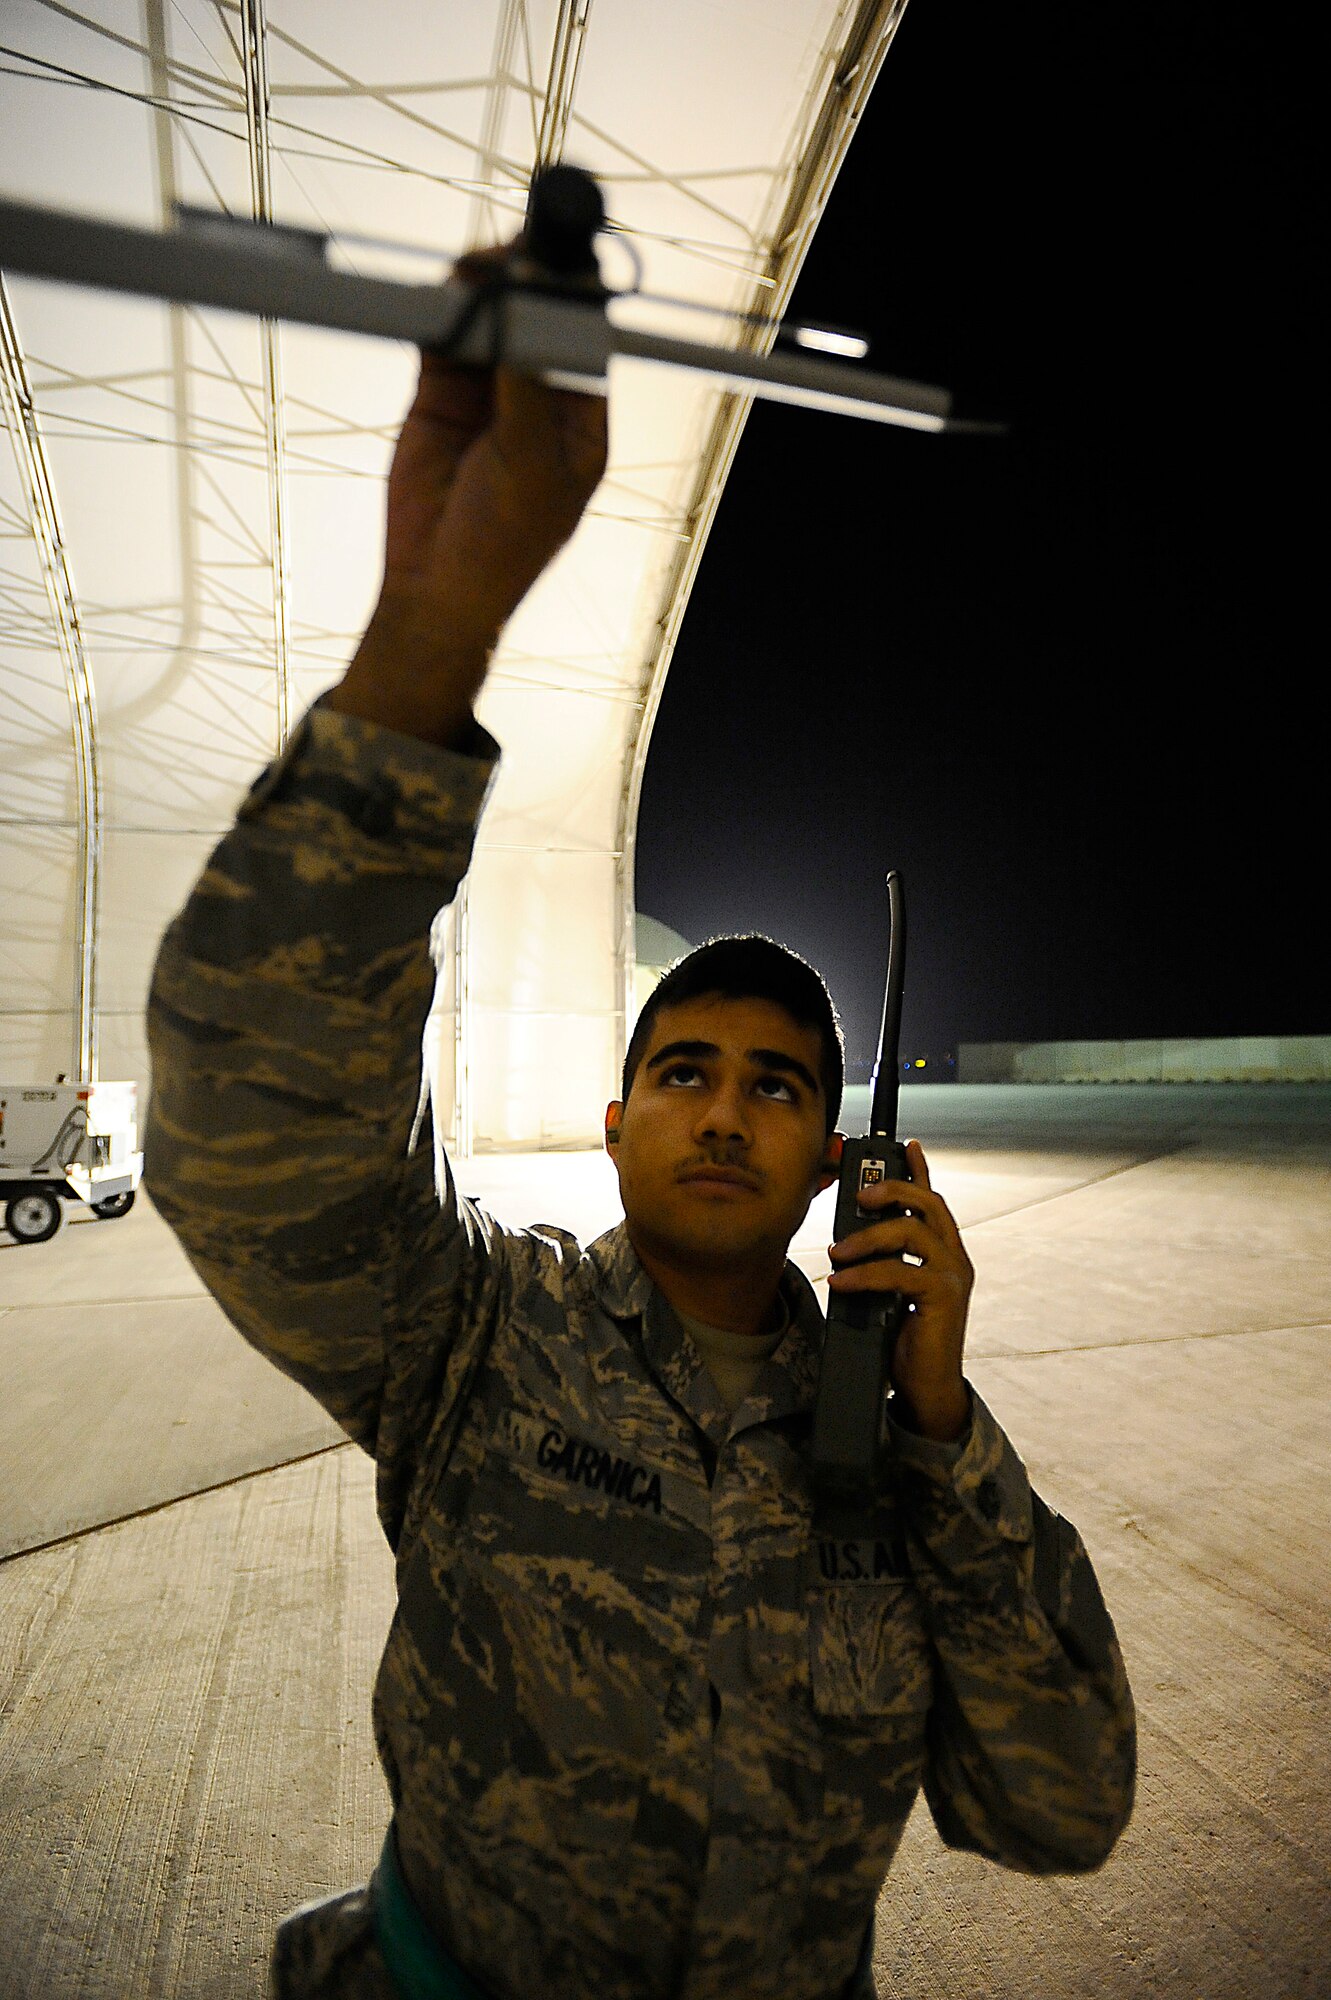 Airman 1st Class Hugo Garnica inspects the angle of attack indicator on an MQ-9 Reaper at Joint Base Balad, Iraq, Nov. 18. This indicator on the unmanned aircraft vehicle measures the pitch of the aircraft. Garnica, an assistant dedicated crew chief assigned to the 332nd Expeditionary Aircraft Maintenance Squadron, was performing a pre-flight check to ensure the aircraft was operational. He is an Oceanside, Calif., native deployed from Creech Air Force Base, Nev. (U.S. Air Force photo/Airman 1st Class Jason Epley)